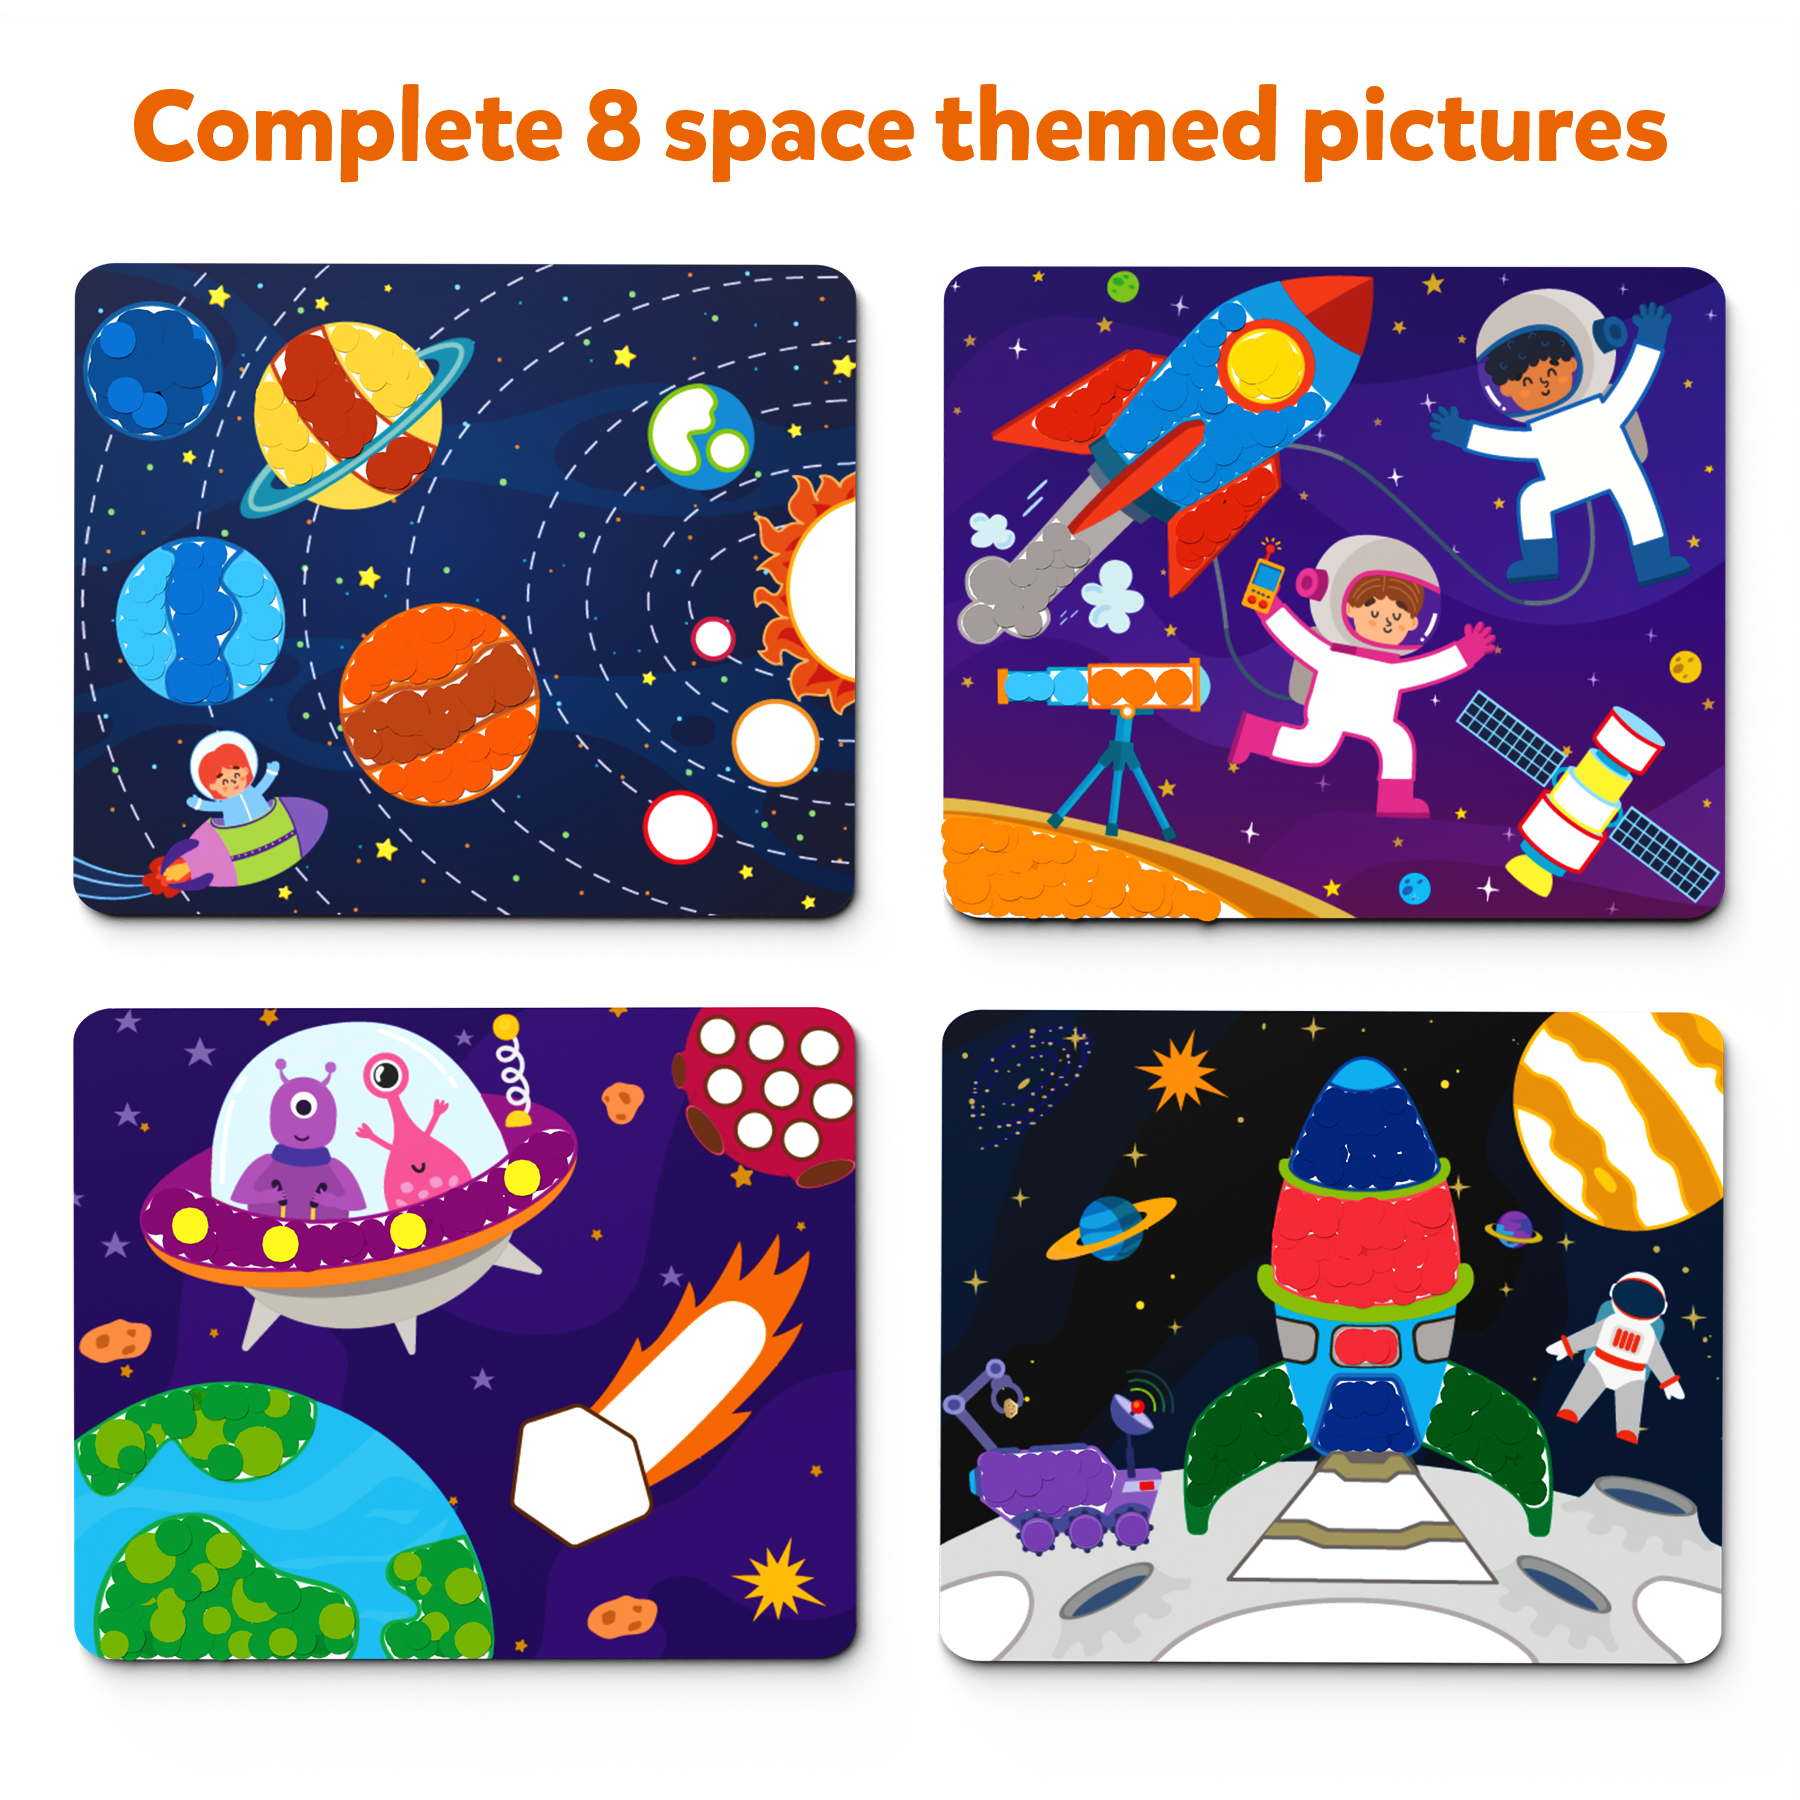 Skillmatics Art Activity Dot It - No Mess Sticker Art, 8 Space Themed Pictures, Gifts for Ages 3 to 7